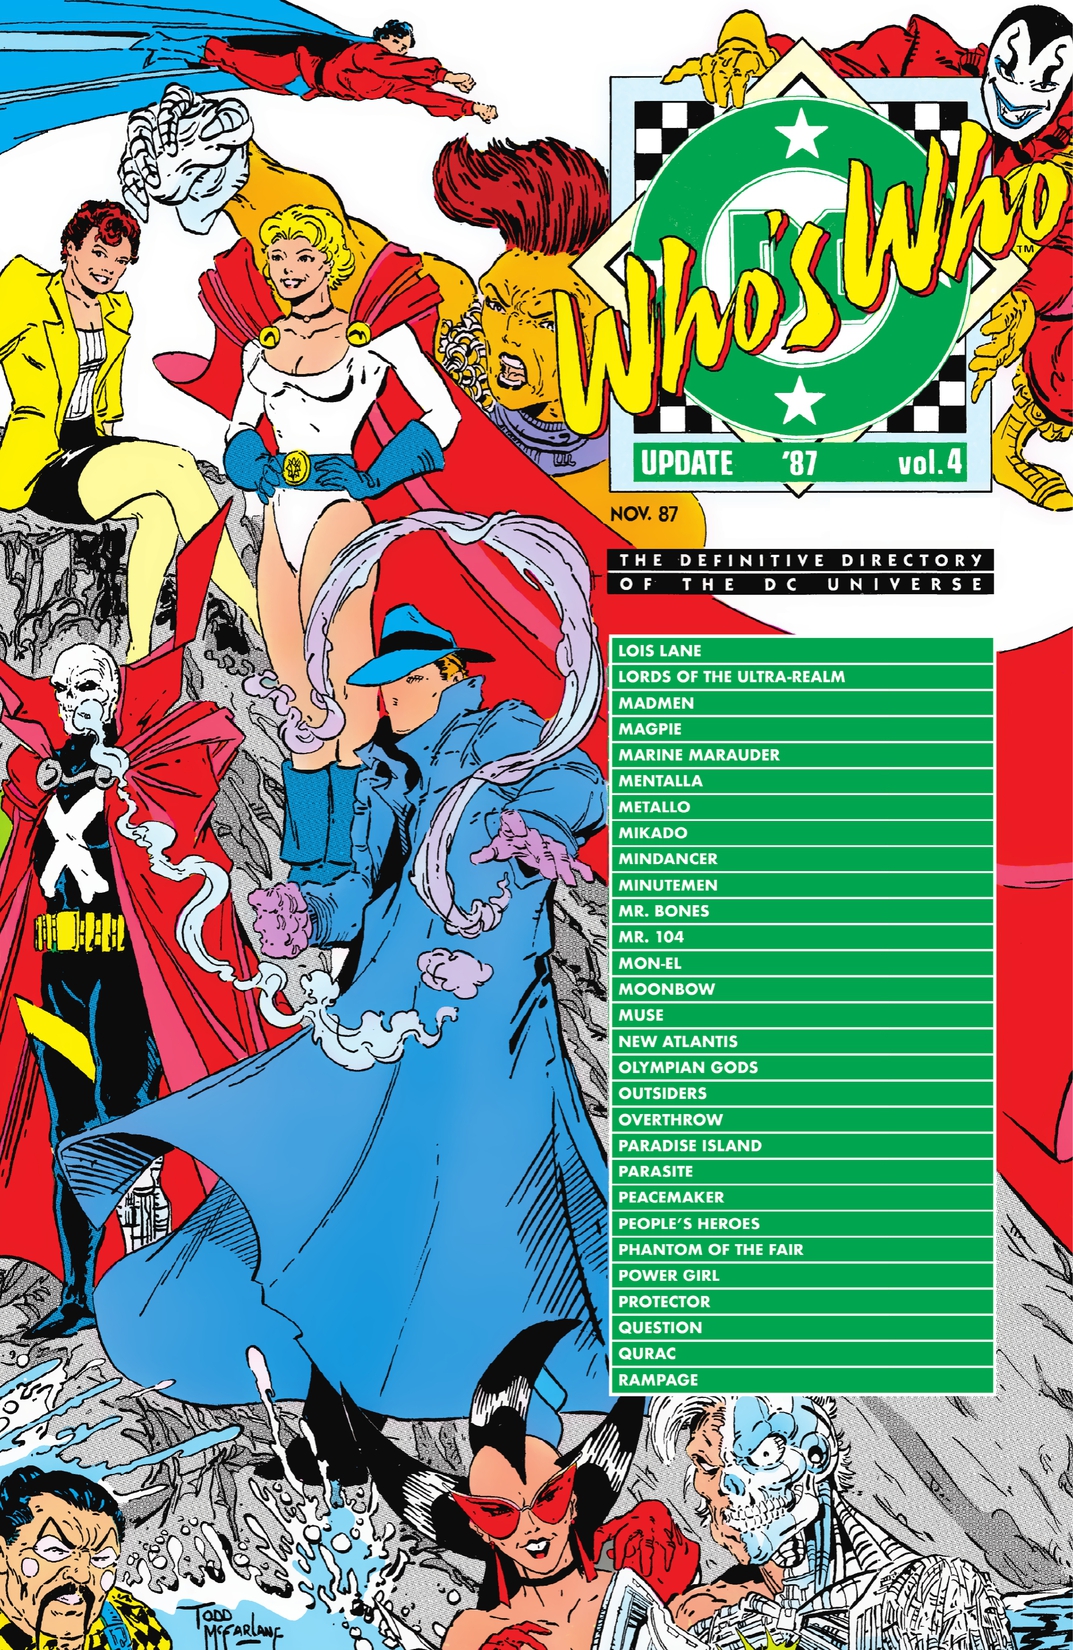 Who's Who Update 1987 #4 preview images